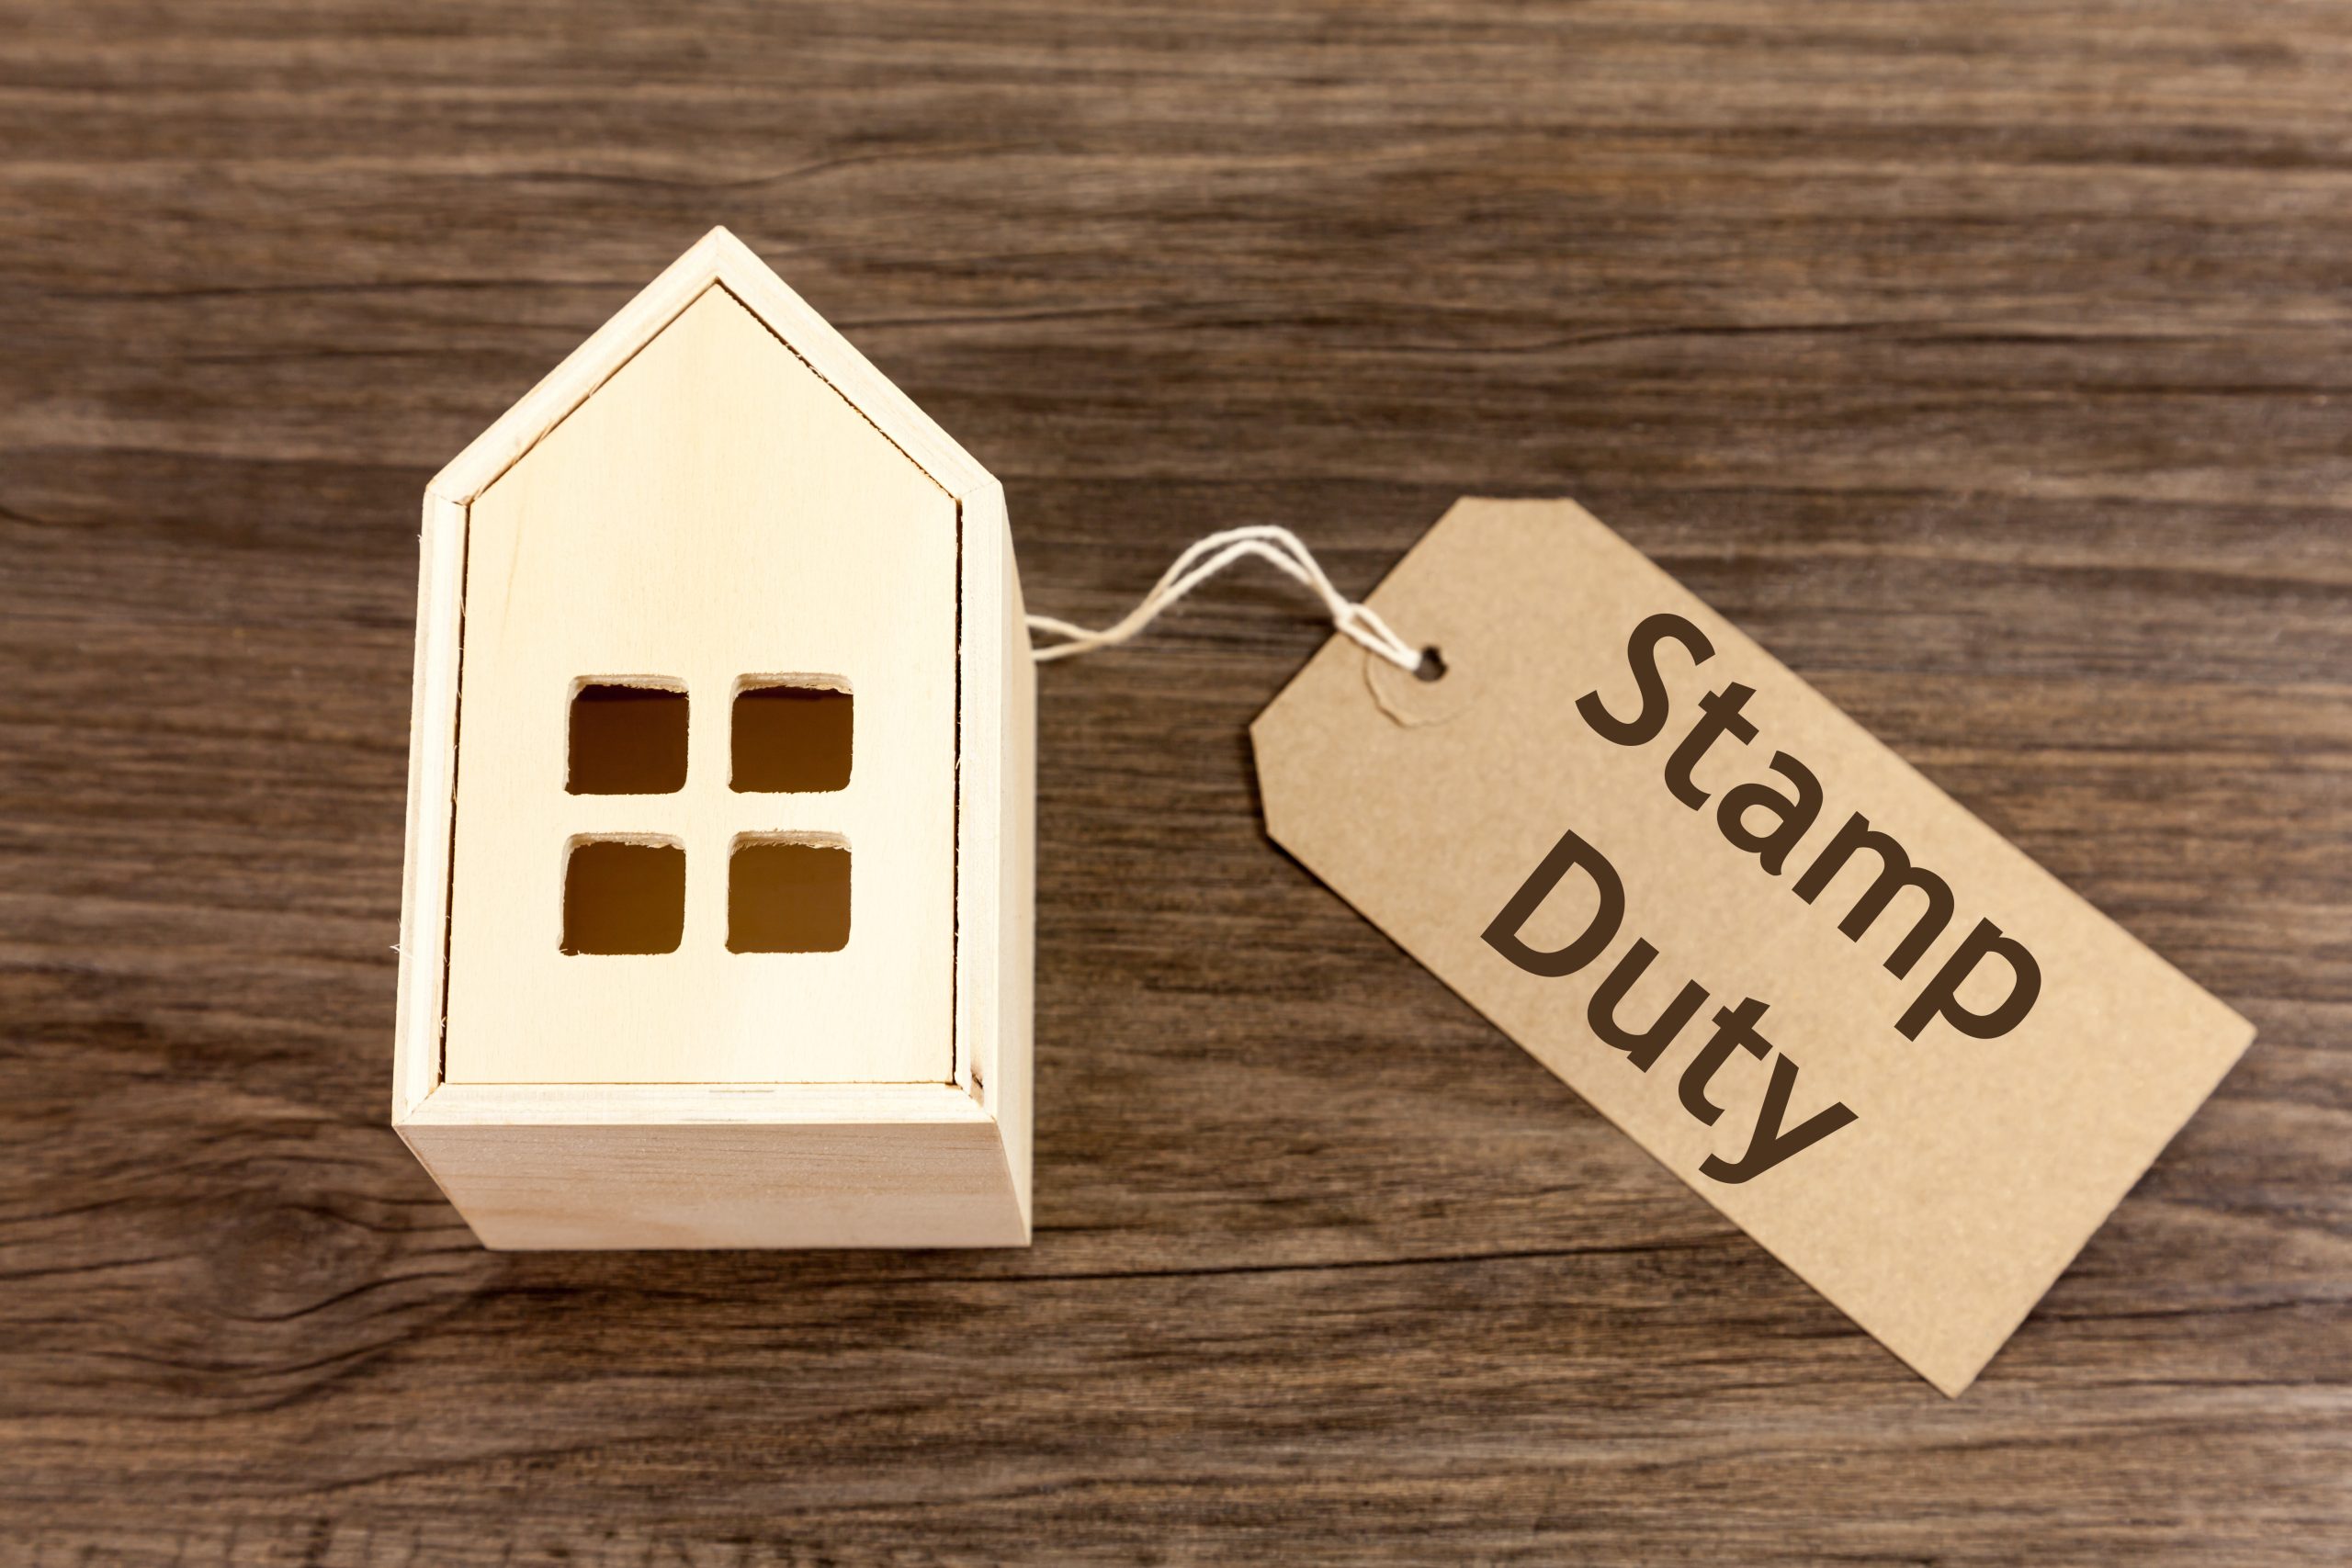 Stamp Duty Land Tax holiday brings a welcome boost to property market